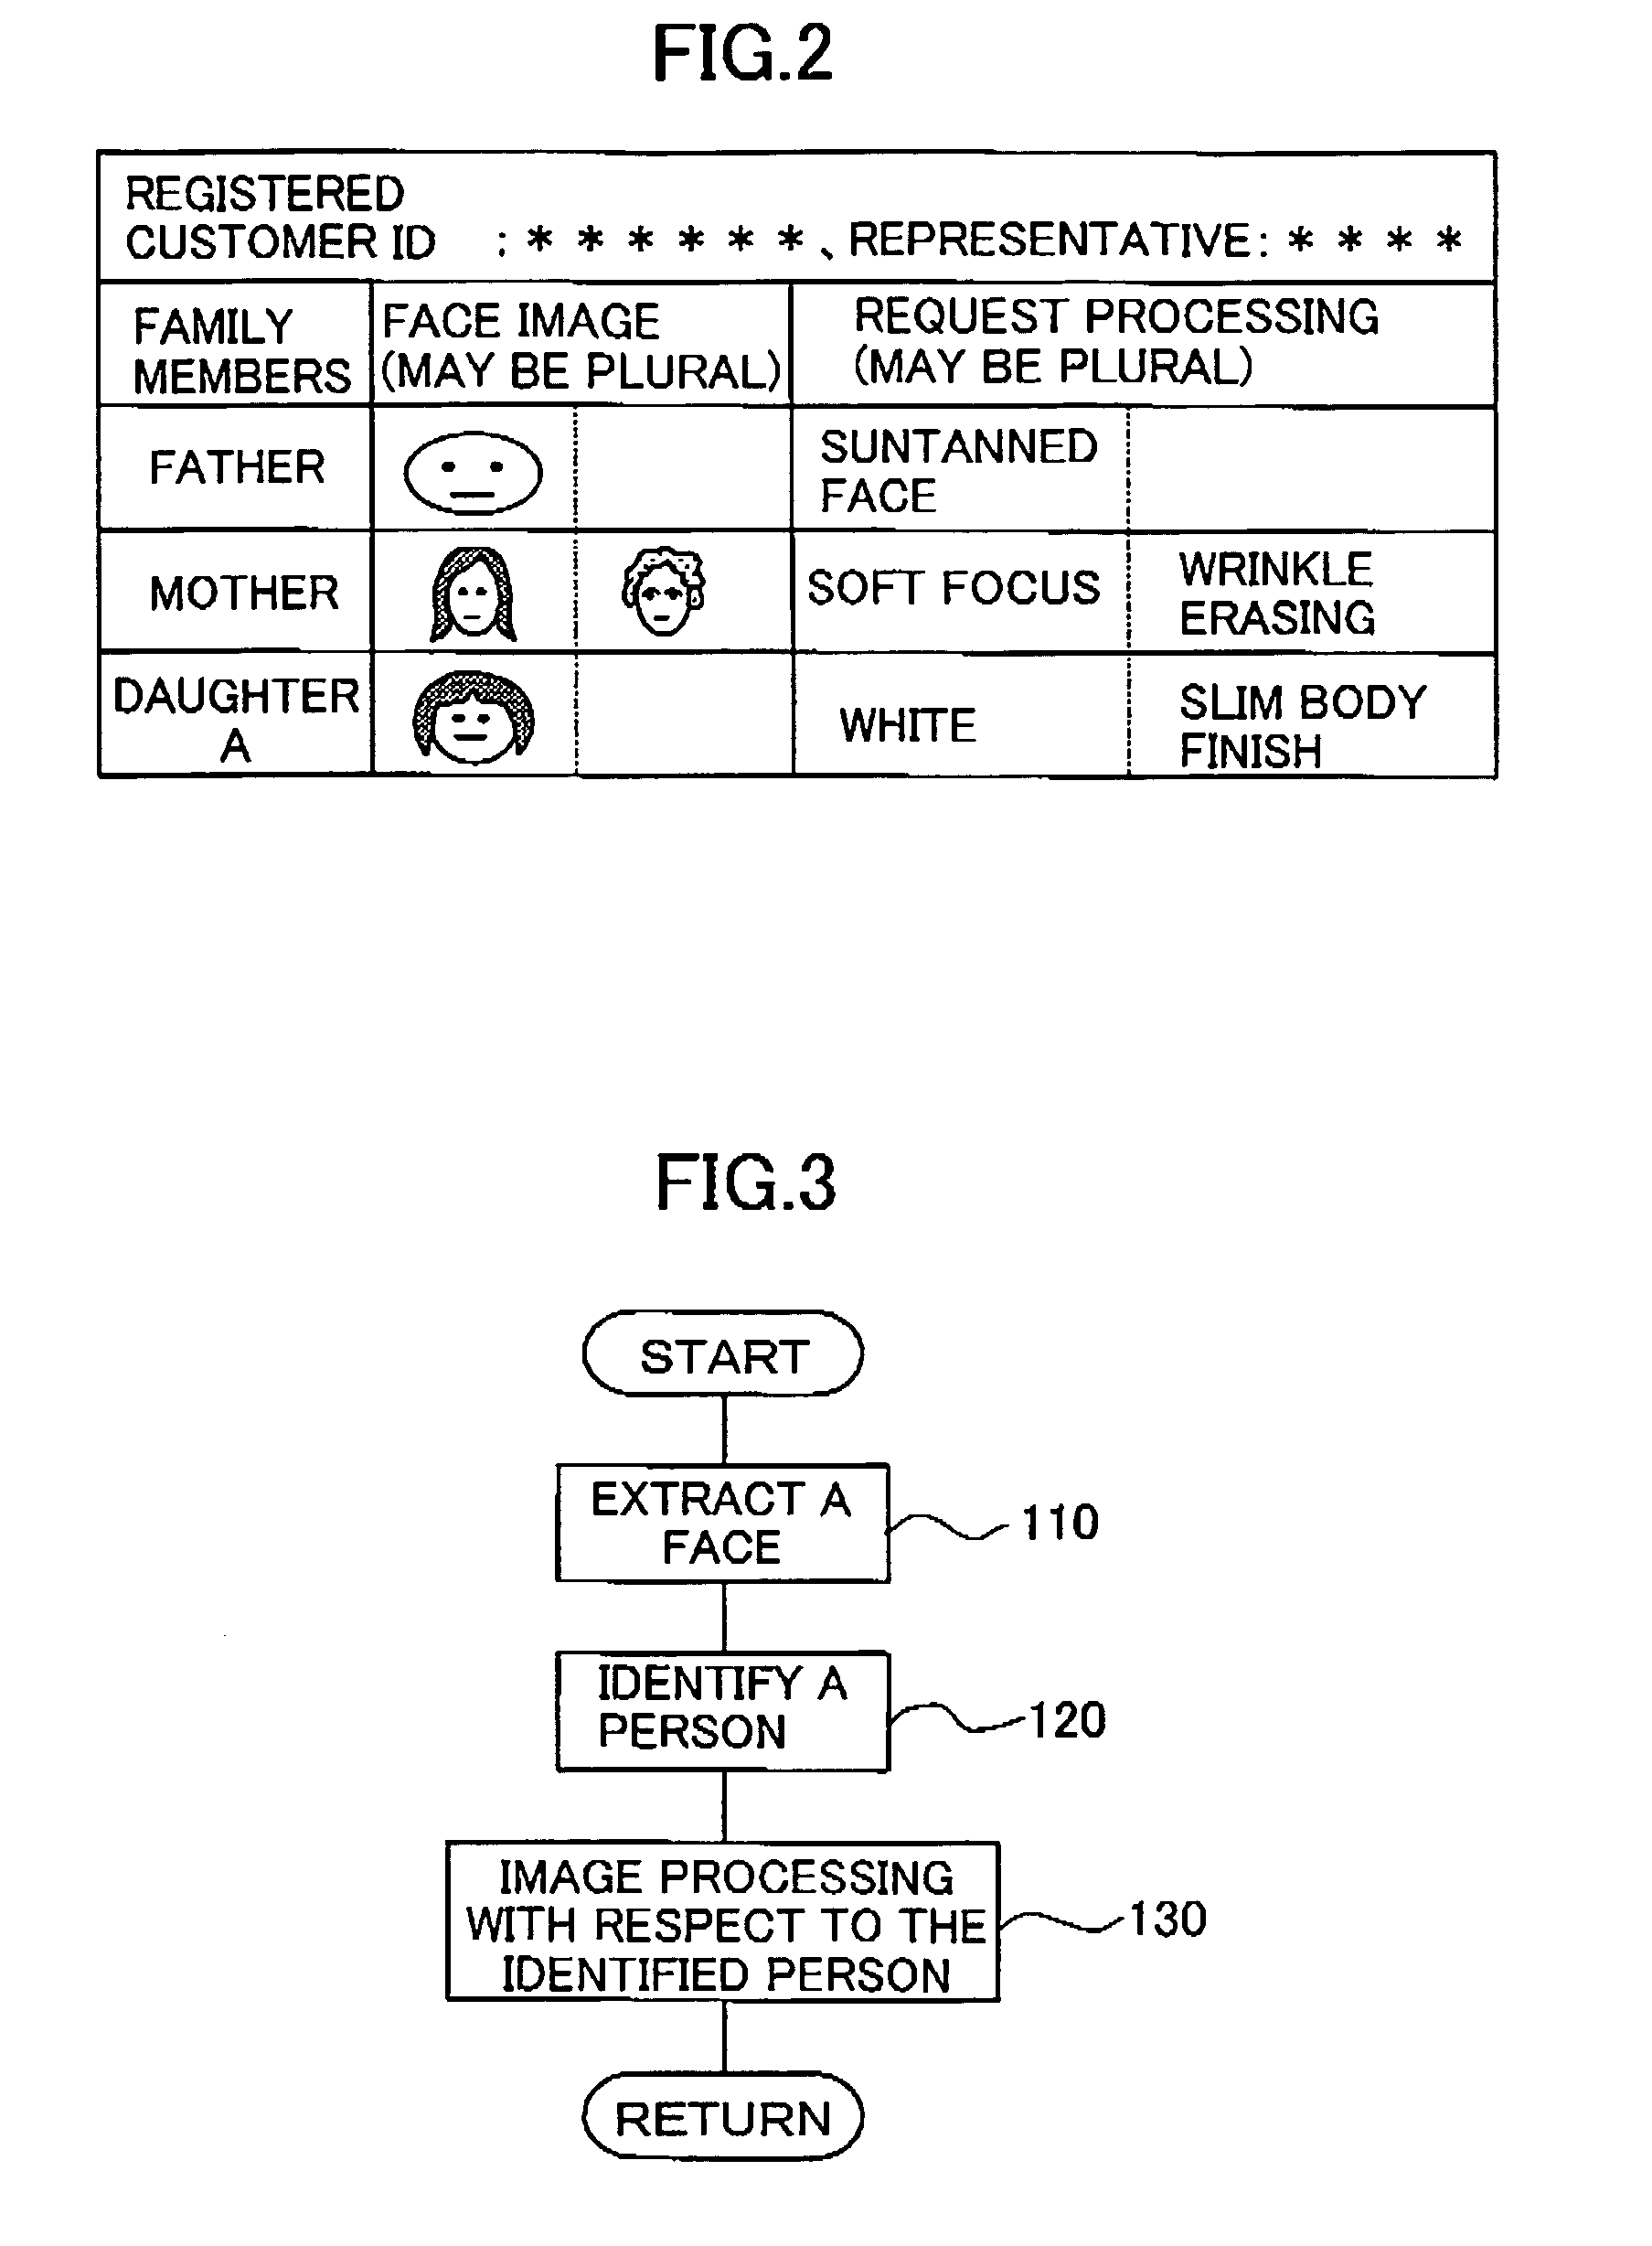 Image processing method using conditions corresponding to an identified person